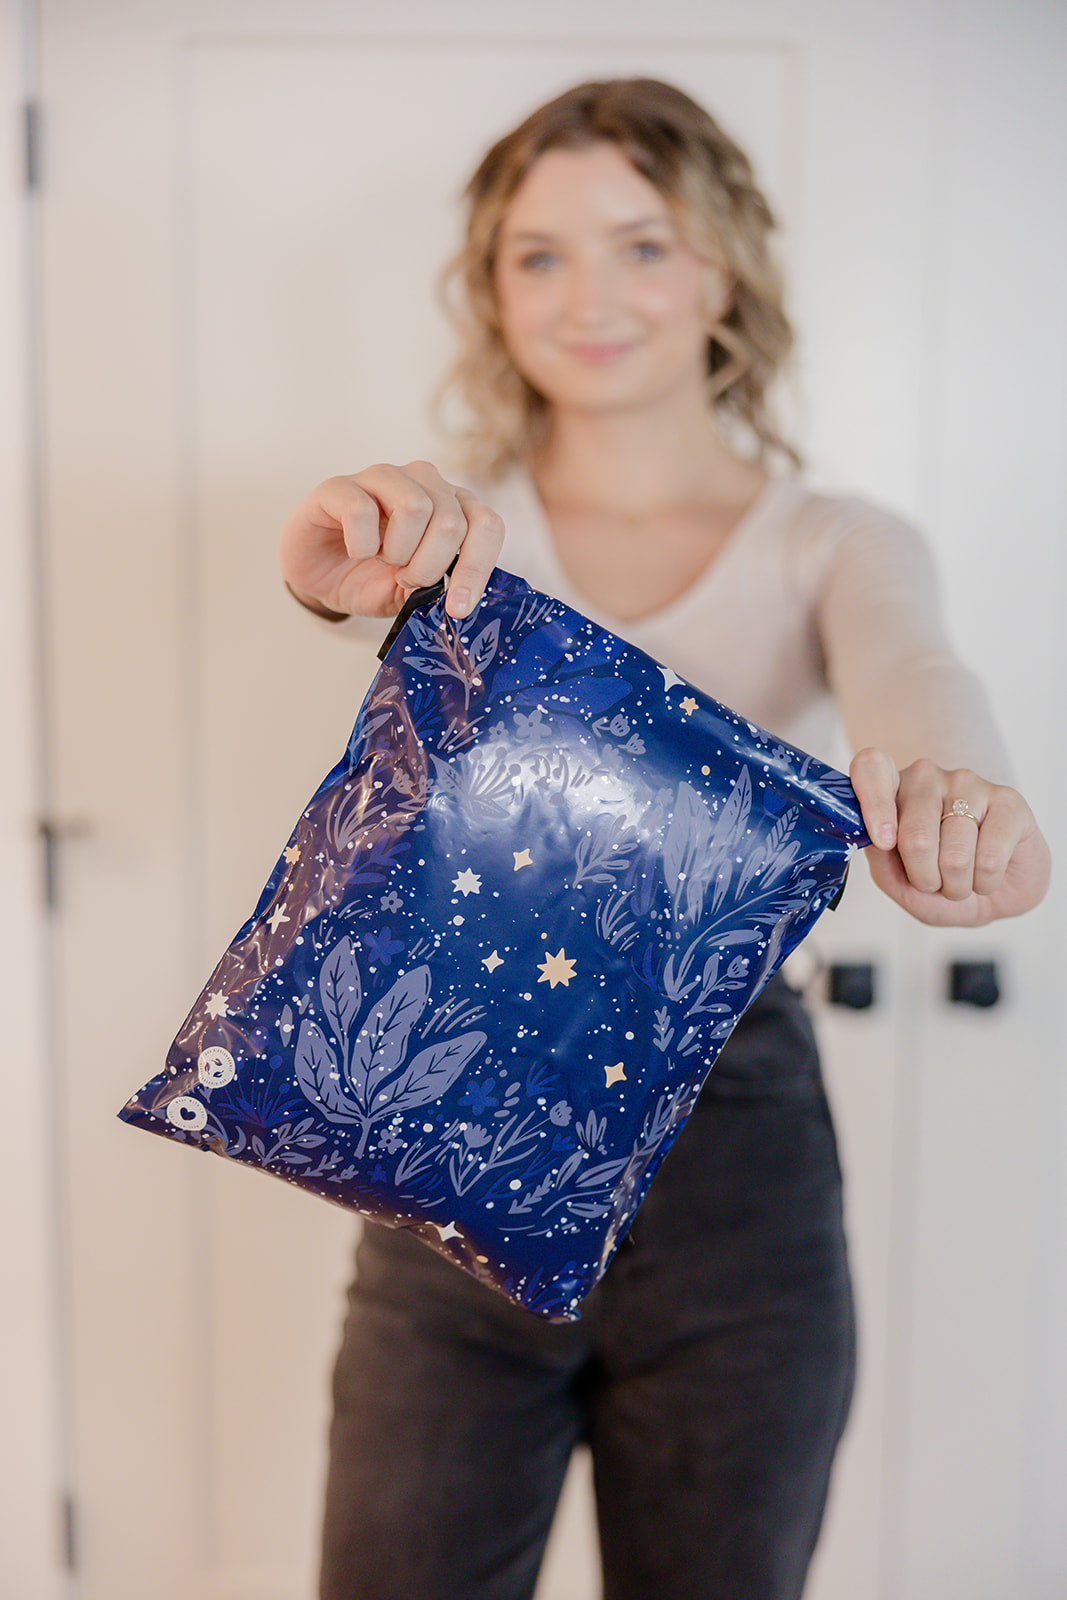 A woman holding up a Midnight Indigo Mailers 10" x 13" bag from impack.co.